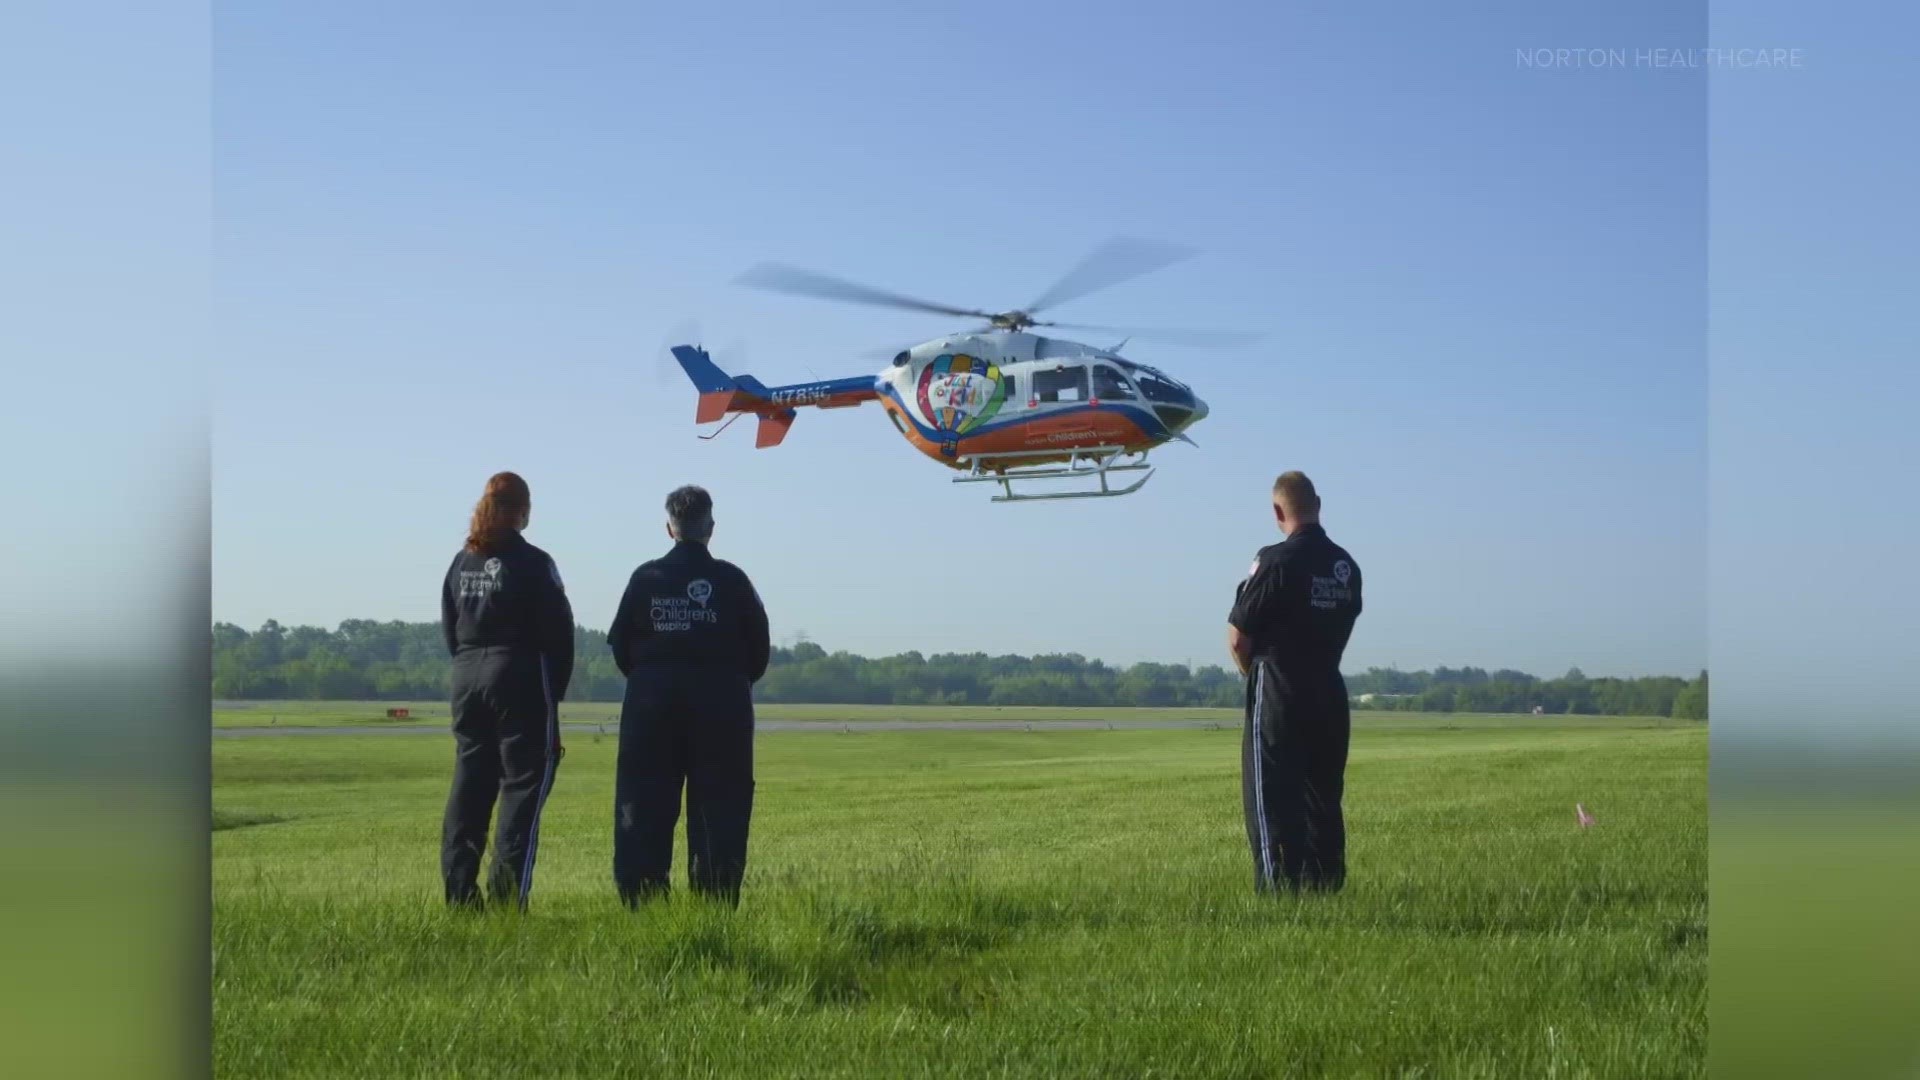 The team is responsible for moving Kentucky's youngest and most critical patients.